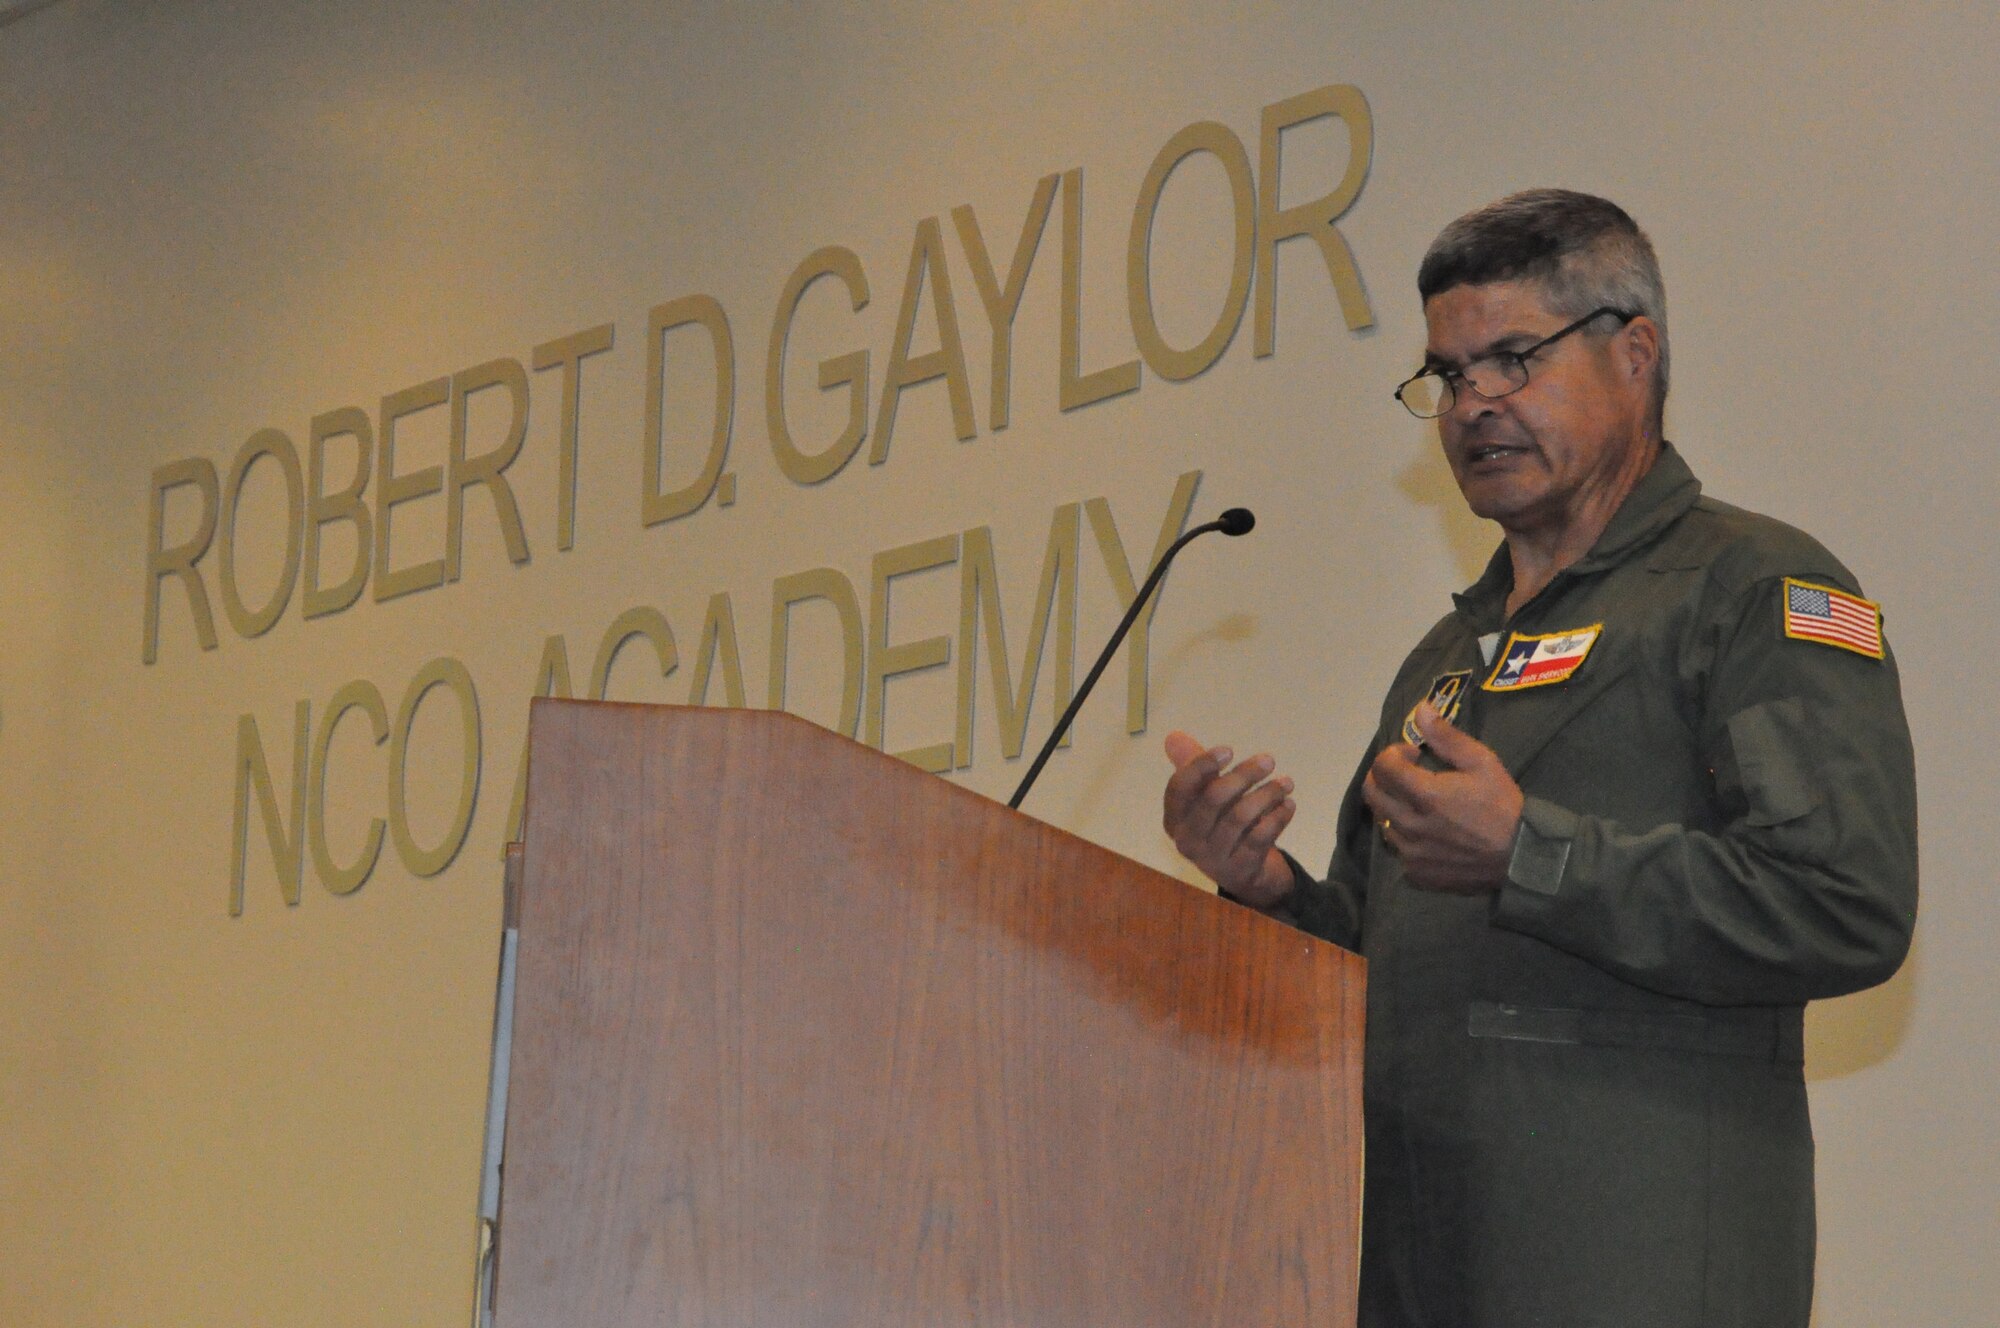 Chief Master Sgt. Mark Sherwood, 356th Airlift Squadron, speaks at the noncommissioned officer induction ceremony held July 13, 2019 at the Robert D. Gaylor NCO Academy, Joint Base San Antonio-Lackland, Texas.